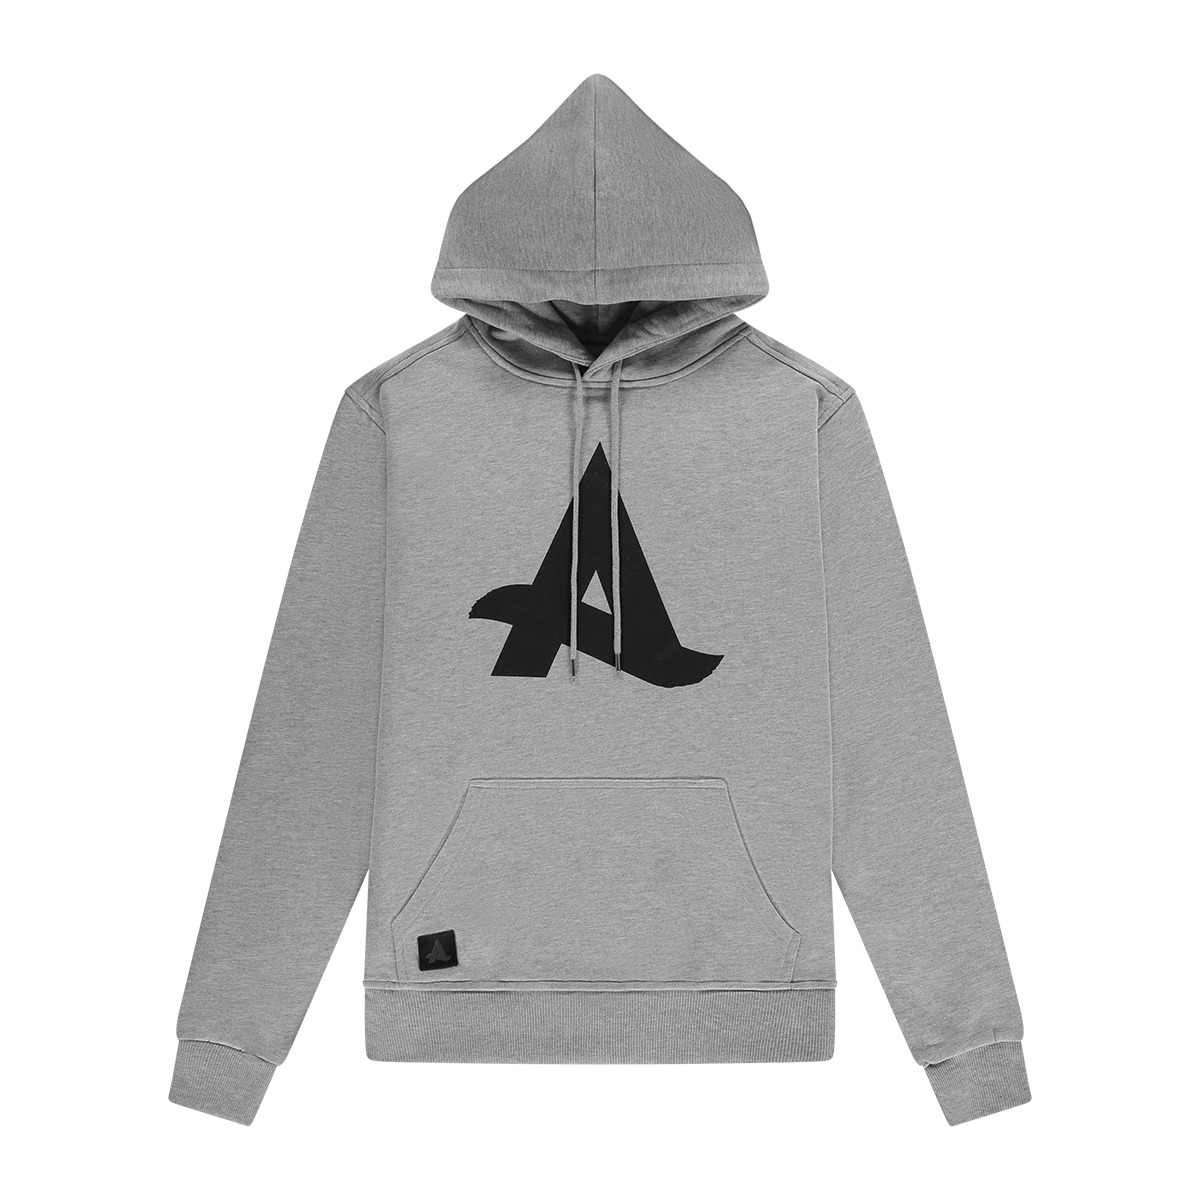 Afrojack_official-hoodie-grey-front